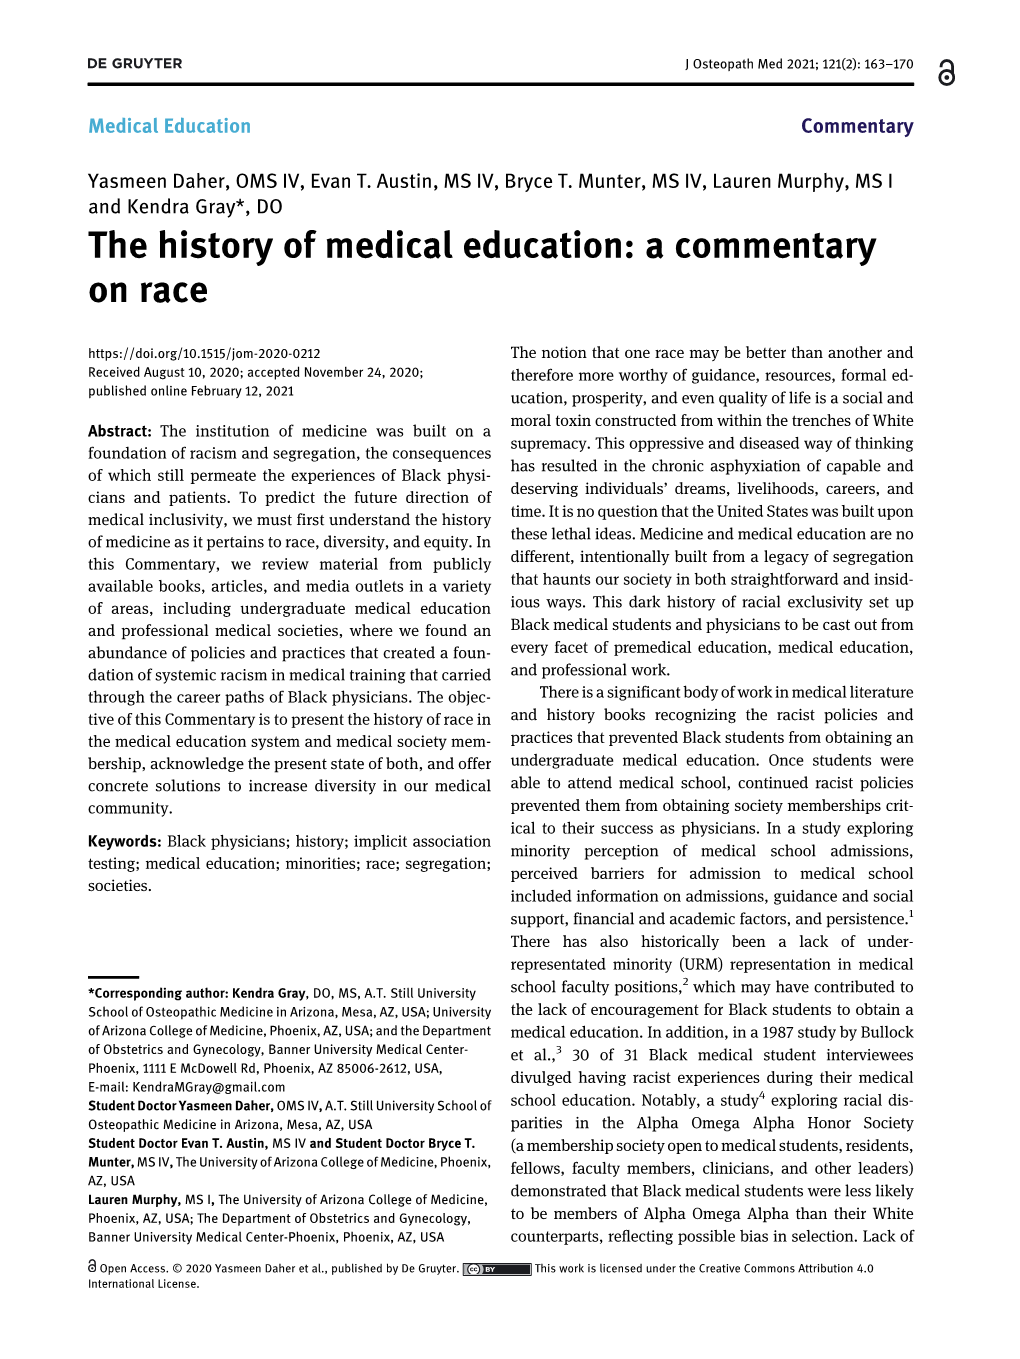 The History of Medical Education: a Commentary on Race